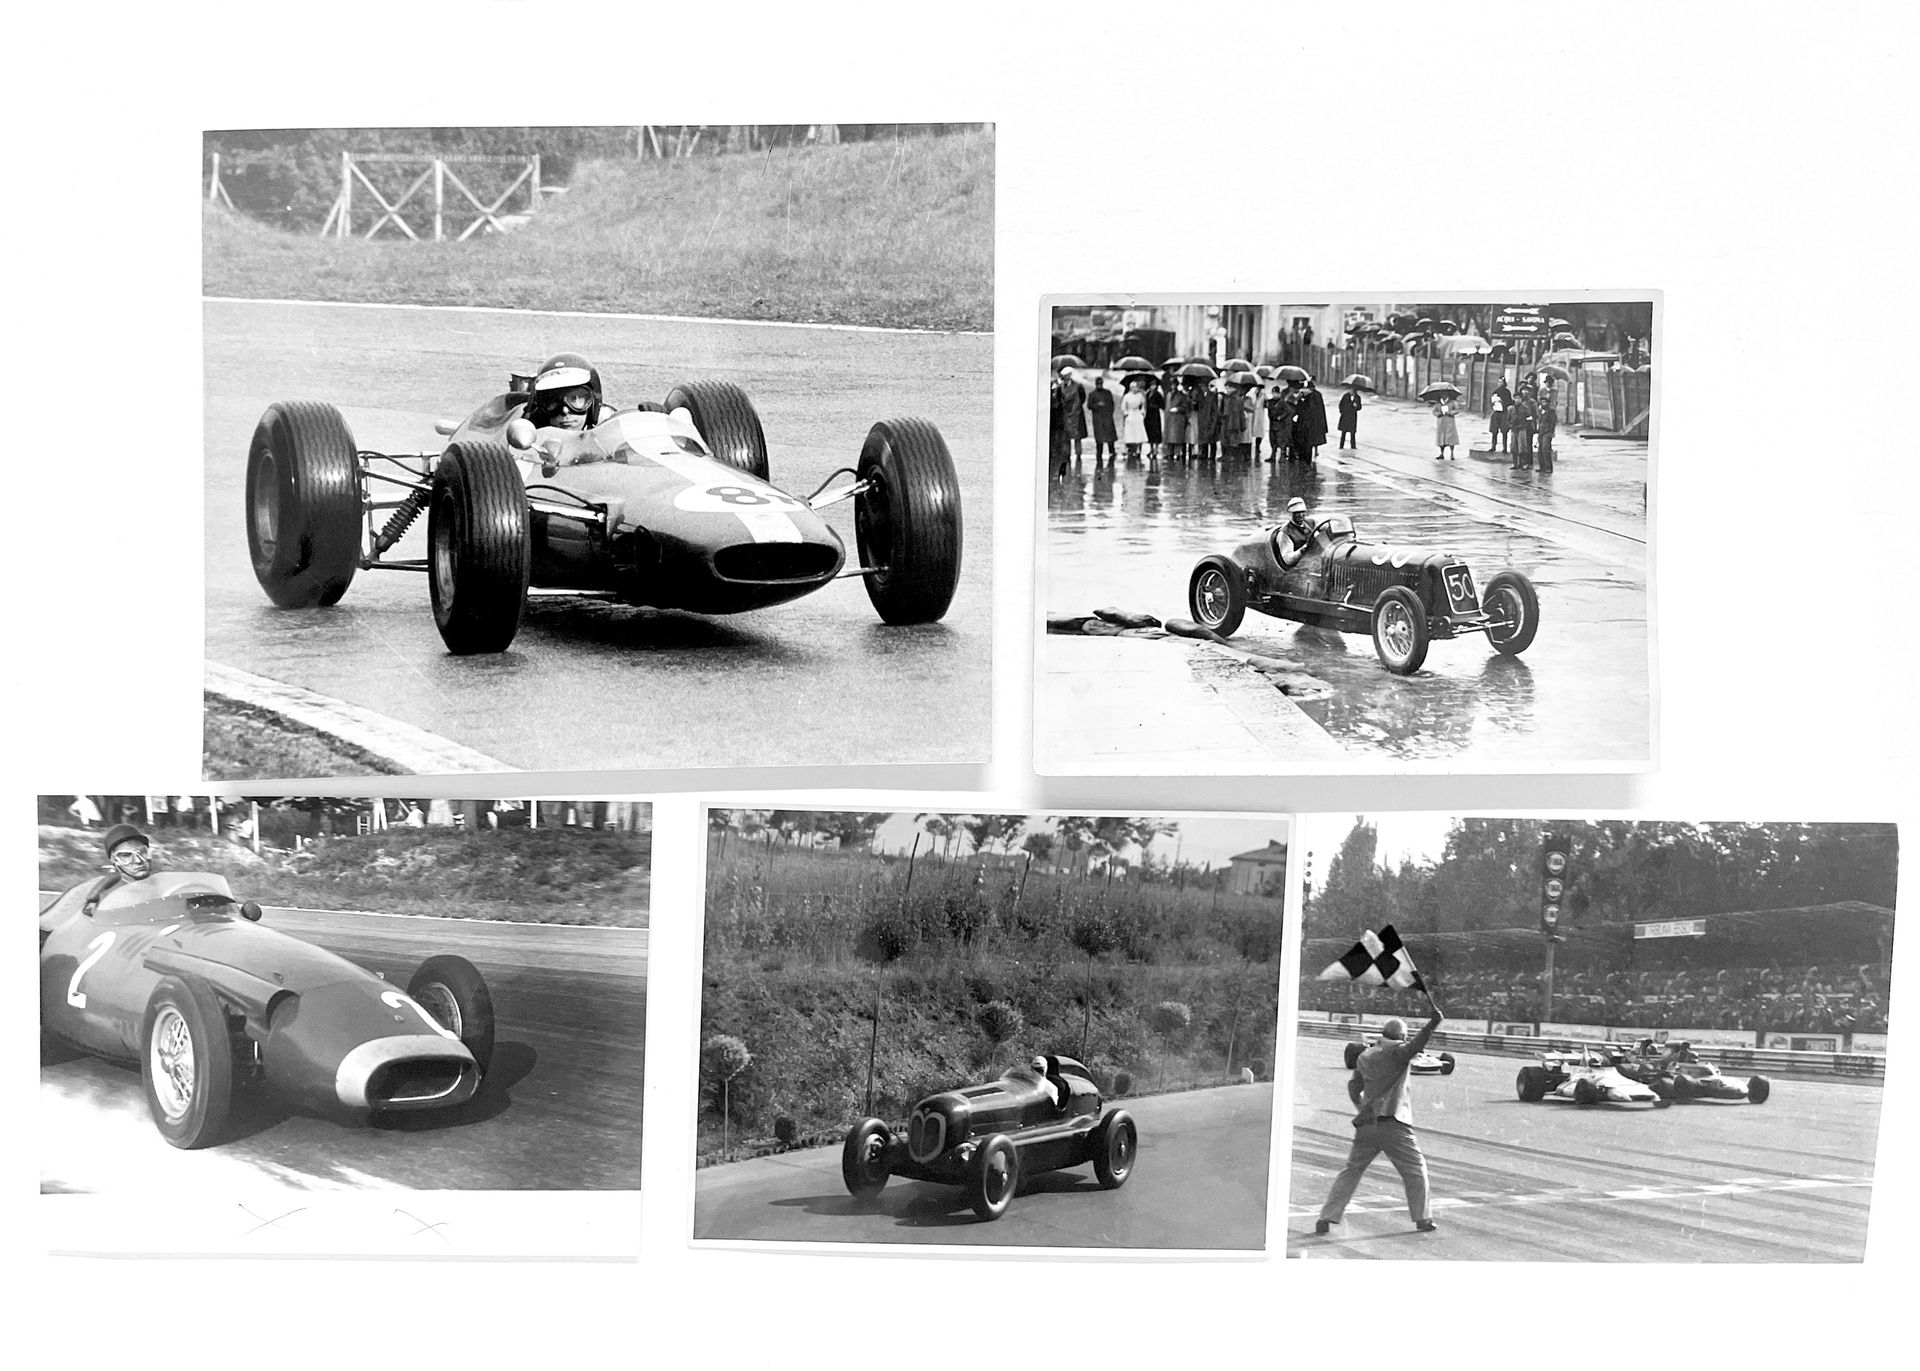 Five motoring photographs Series of five photographs on motoring depicting:

- T&hellip;